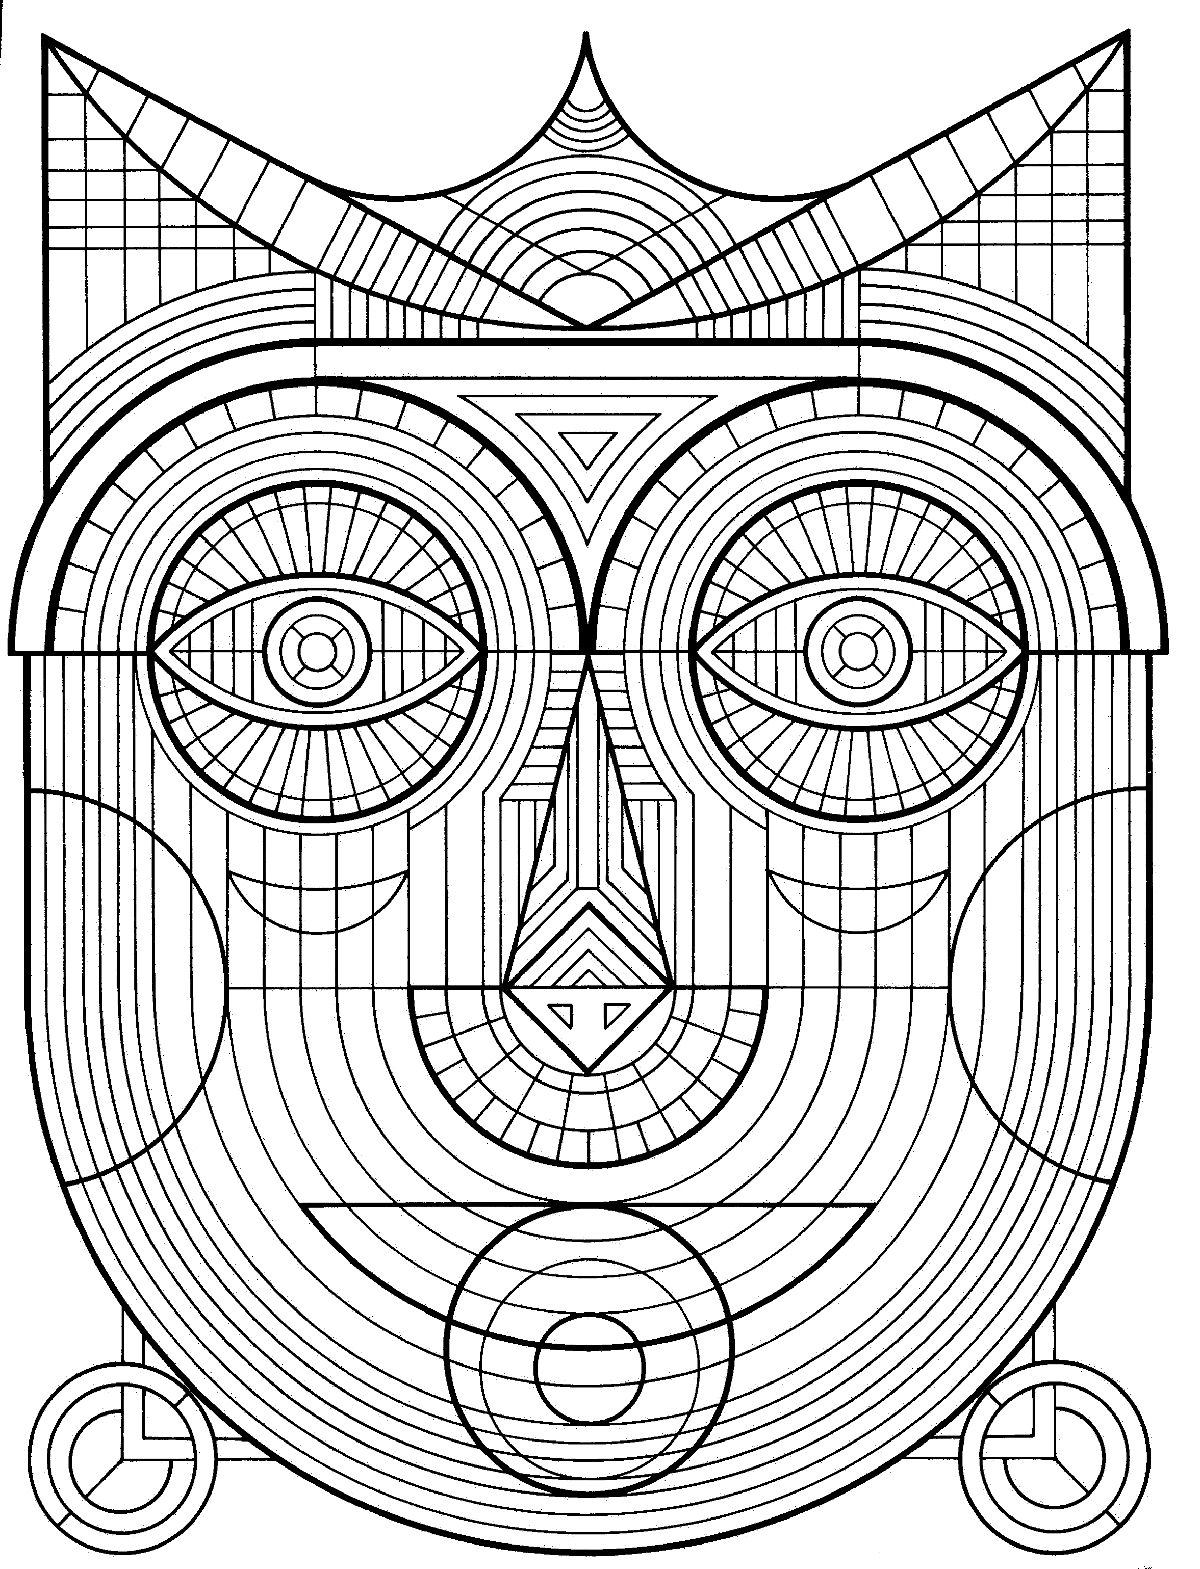 Mask Zen Anti Stress Coloring Pages Adults Justcolor Image Alike